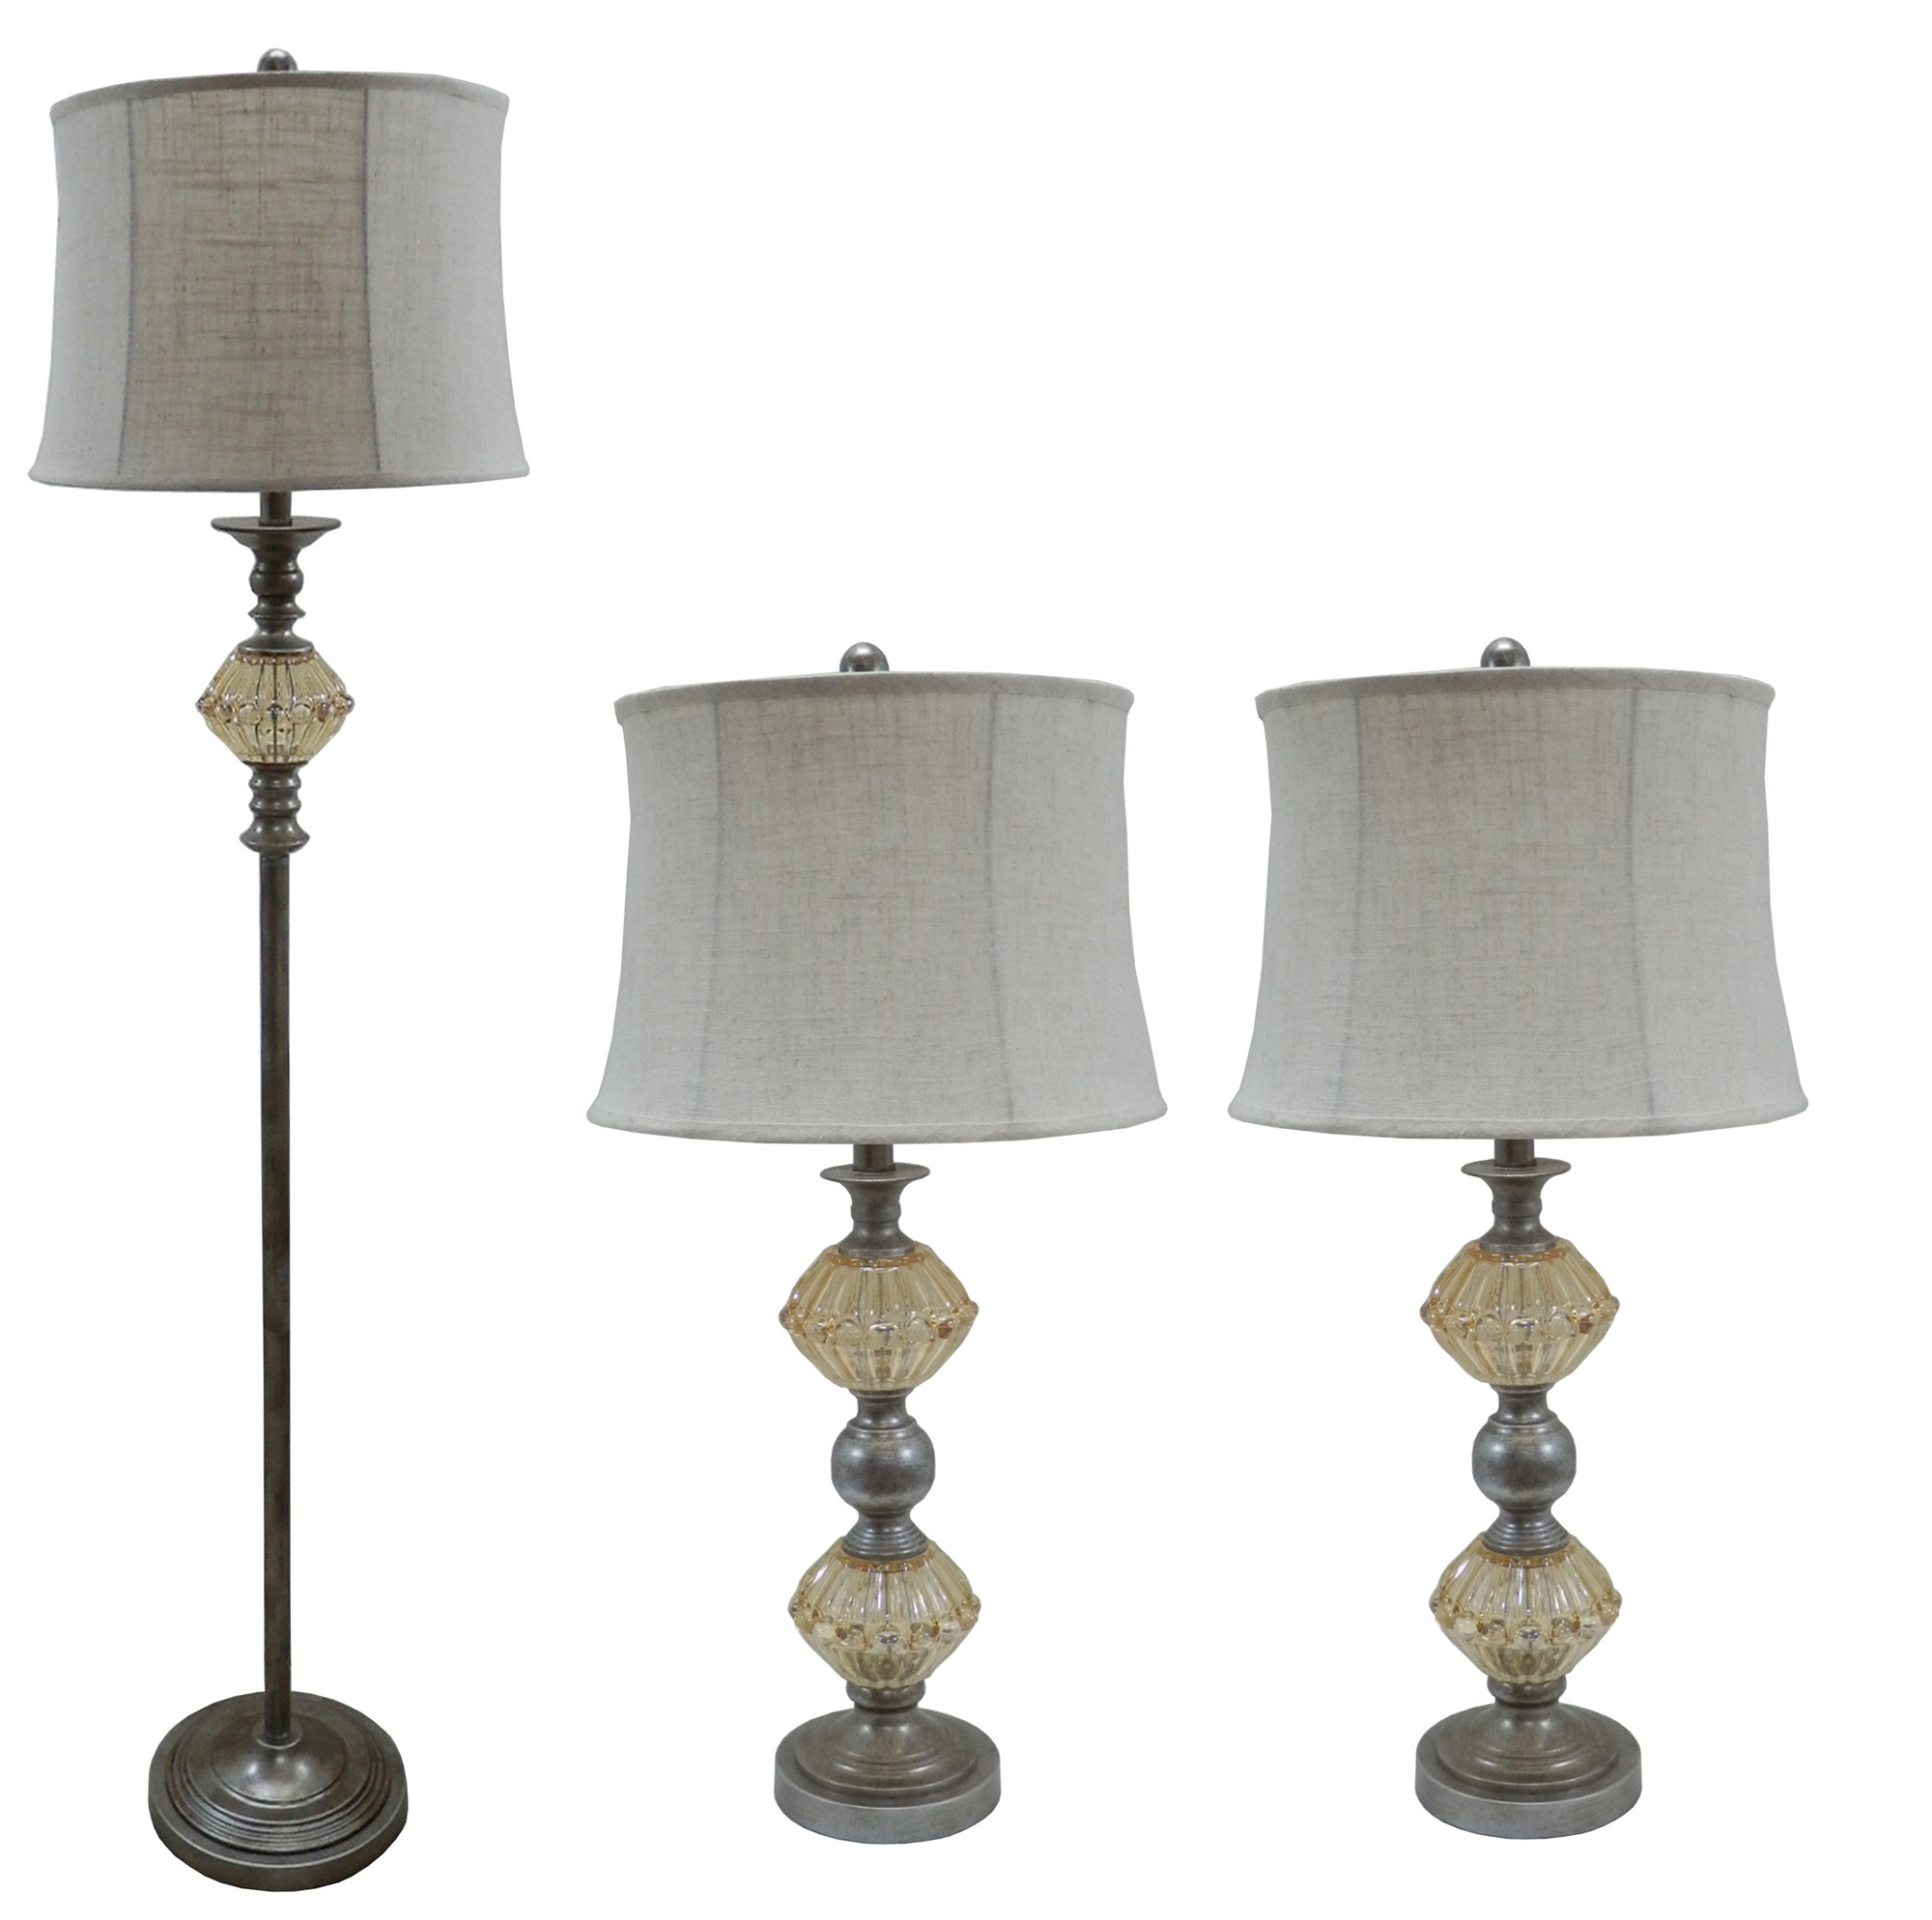 3 Piece Metal & Amber Glass Lamp Set with Antique Silver Finish.